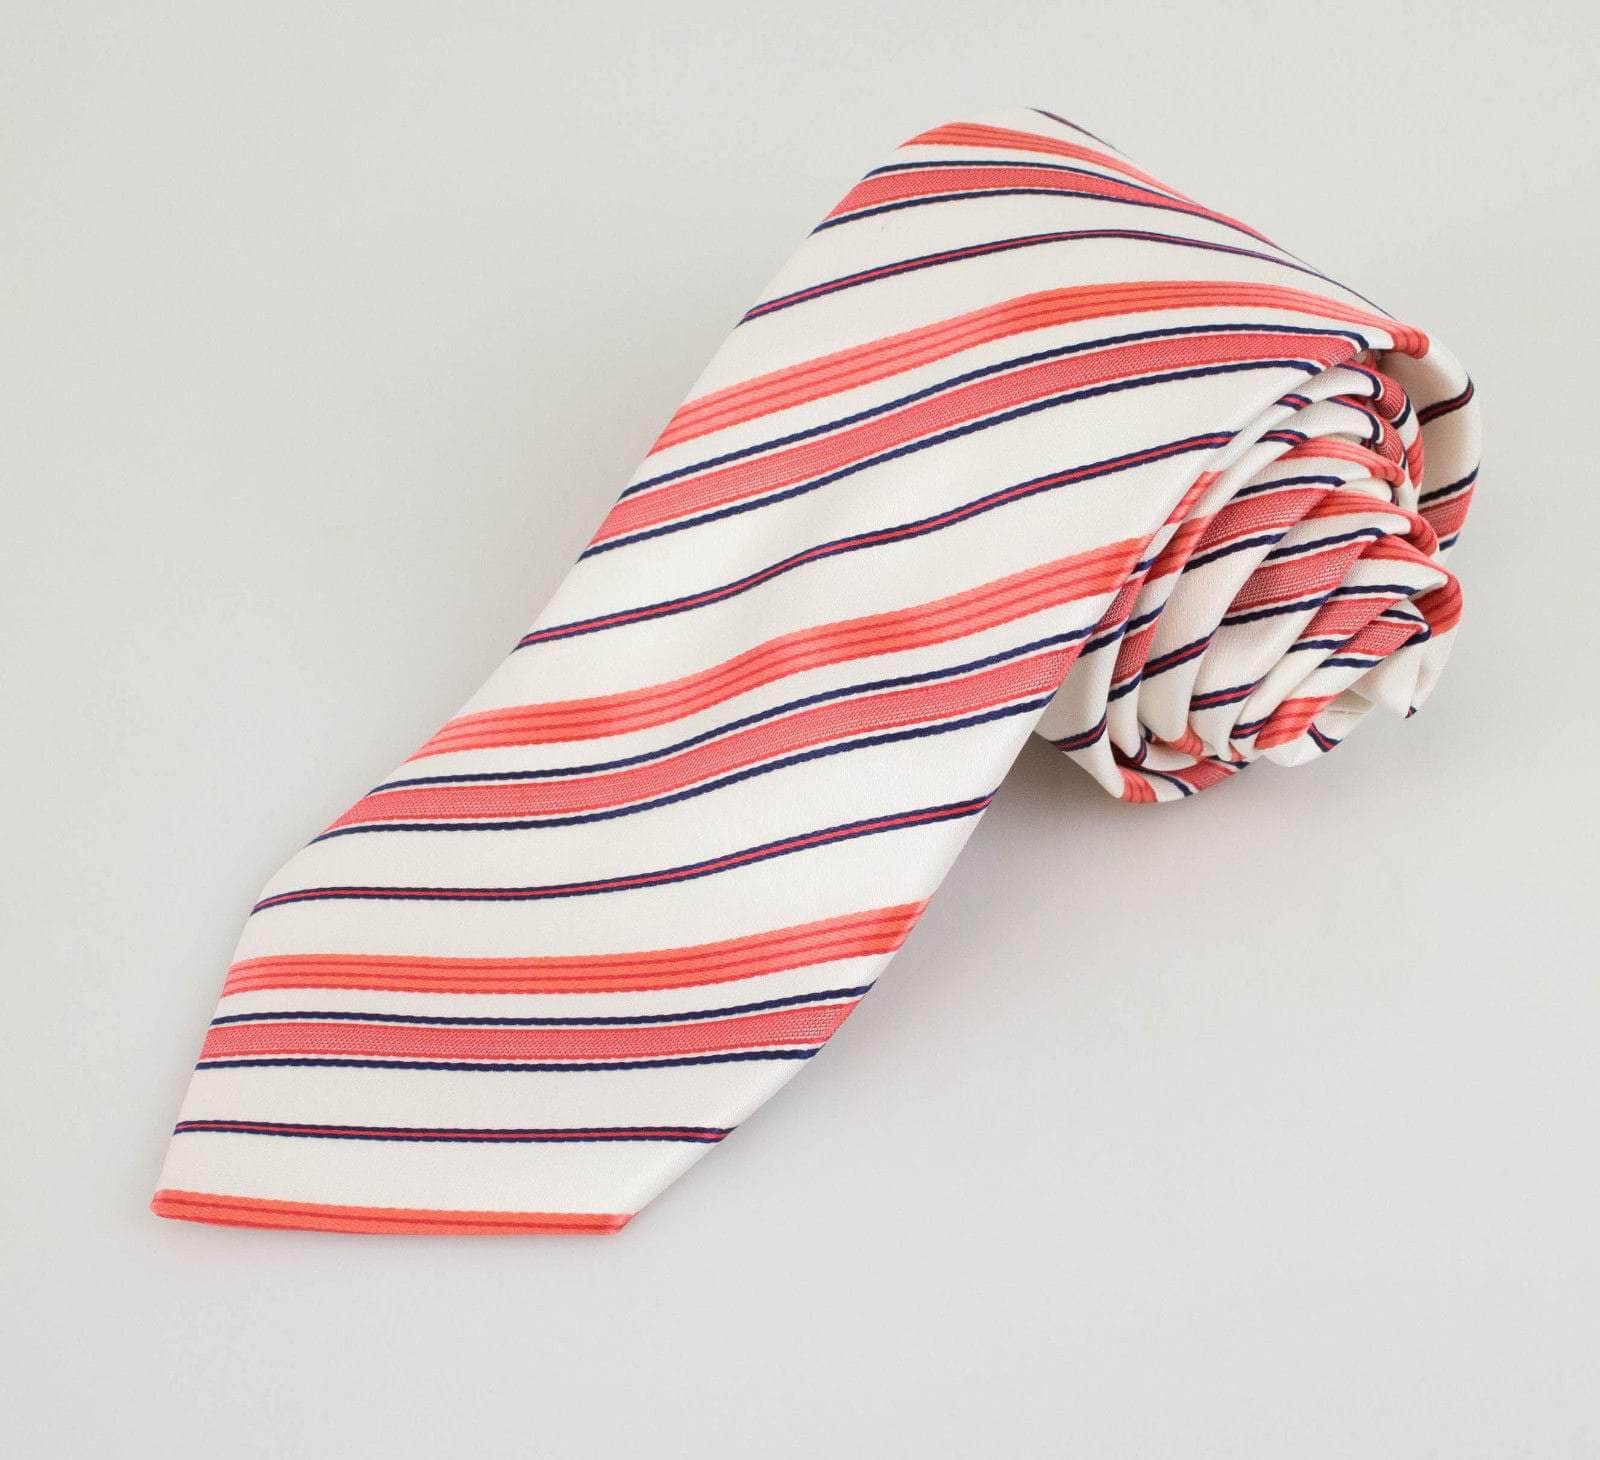 Battisti Napoli battisti-napoli, channelenable-all, chicmi, couponcollection, gender-mens, main-accessories, mens-shoes, shop375, under-250 OS White with Red Striped Pattern 100% Silk Neck Tie 40BK-1021 40BK-1021